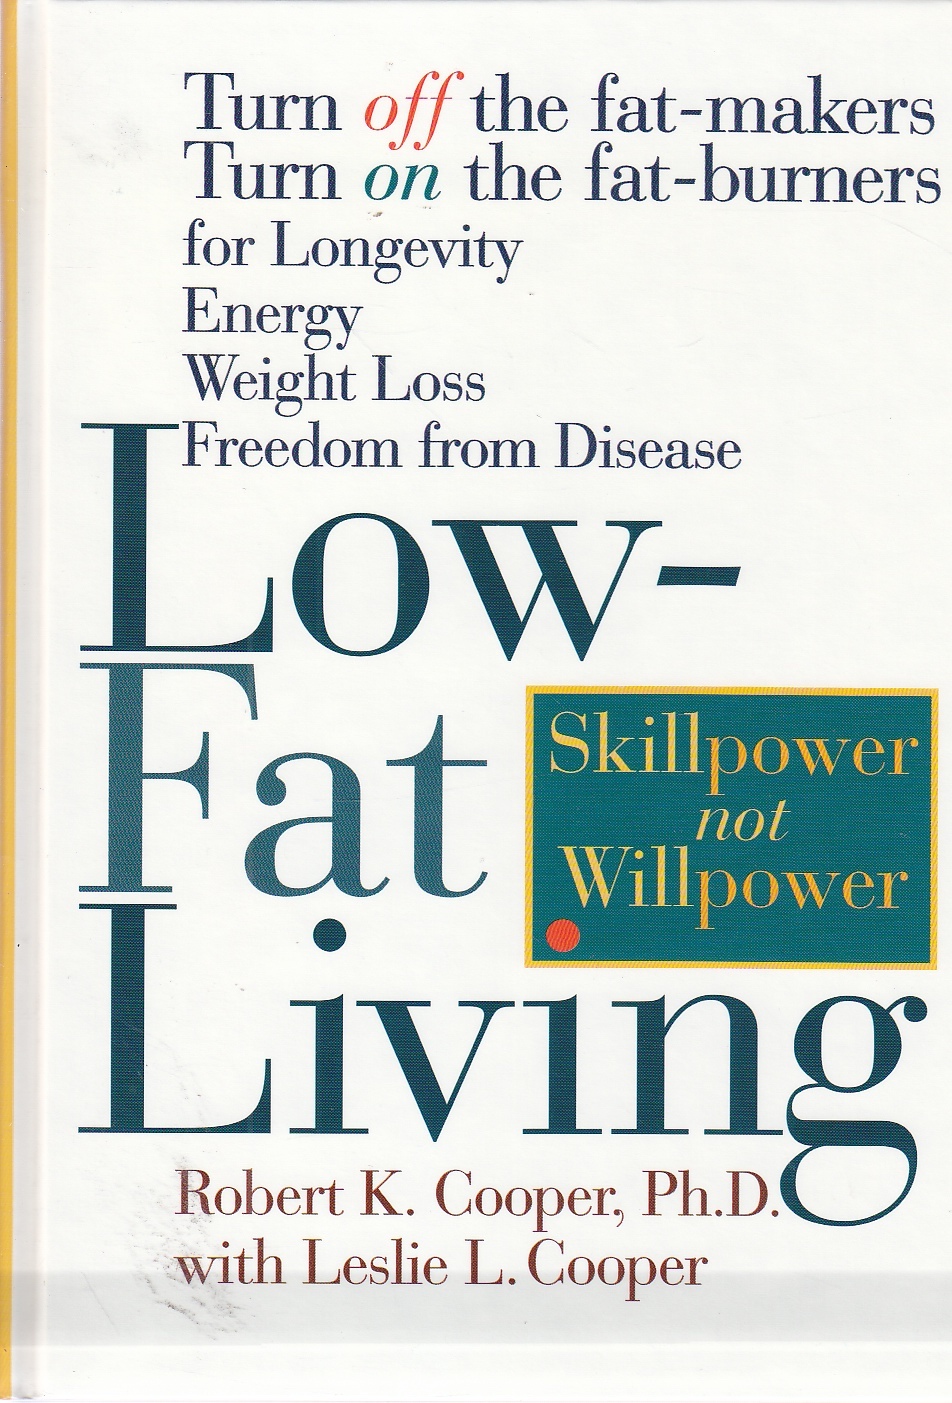 Image for Low-Fat Living  Turn Off the Fat-Makers Turn on the Fat-Burners for Longevity Energy Weight Loss Freedom from Disease